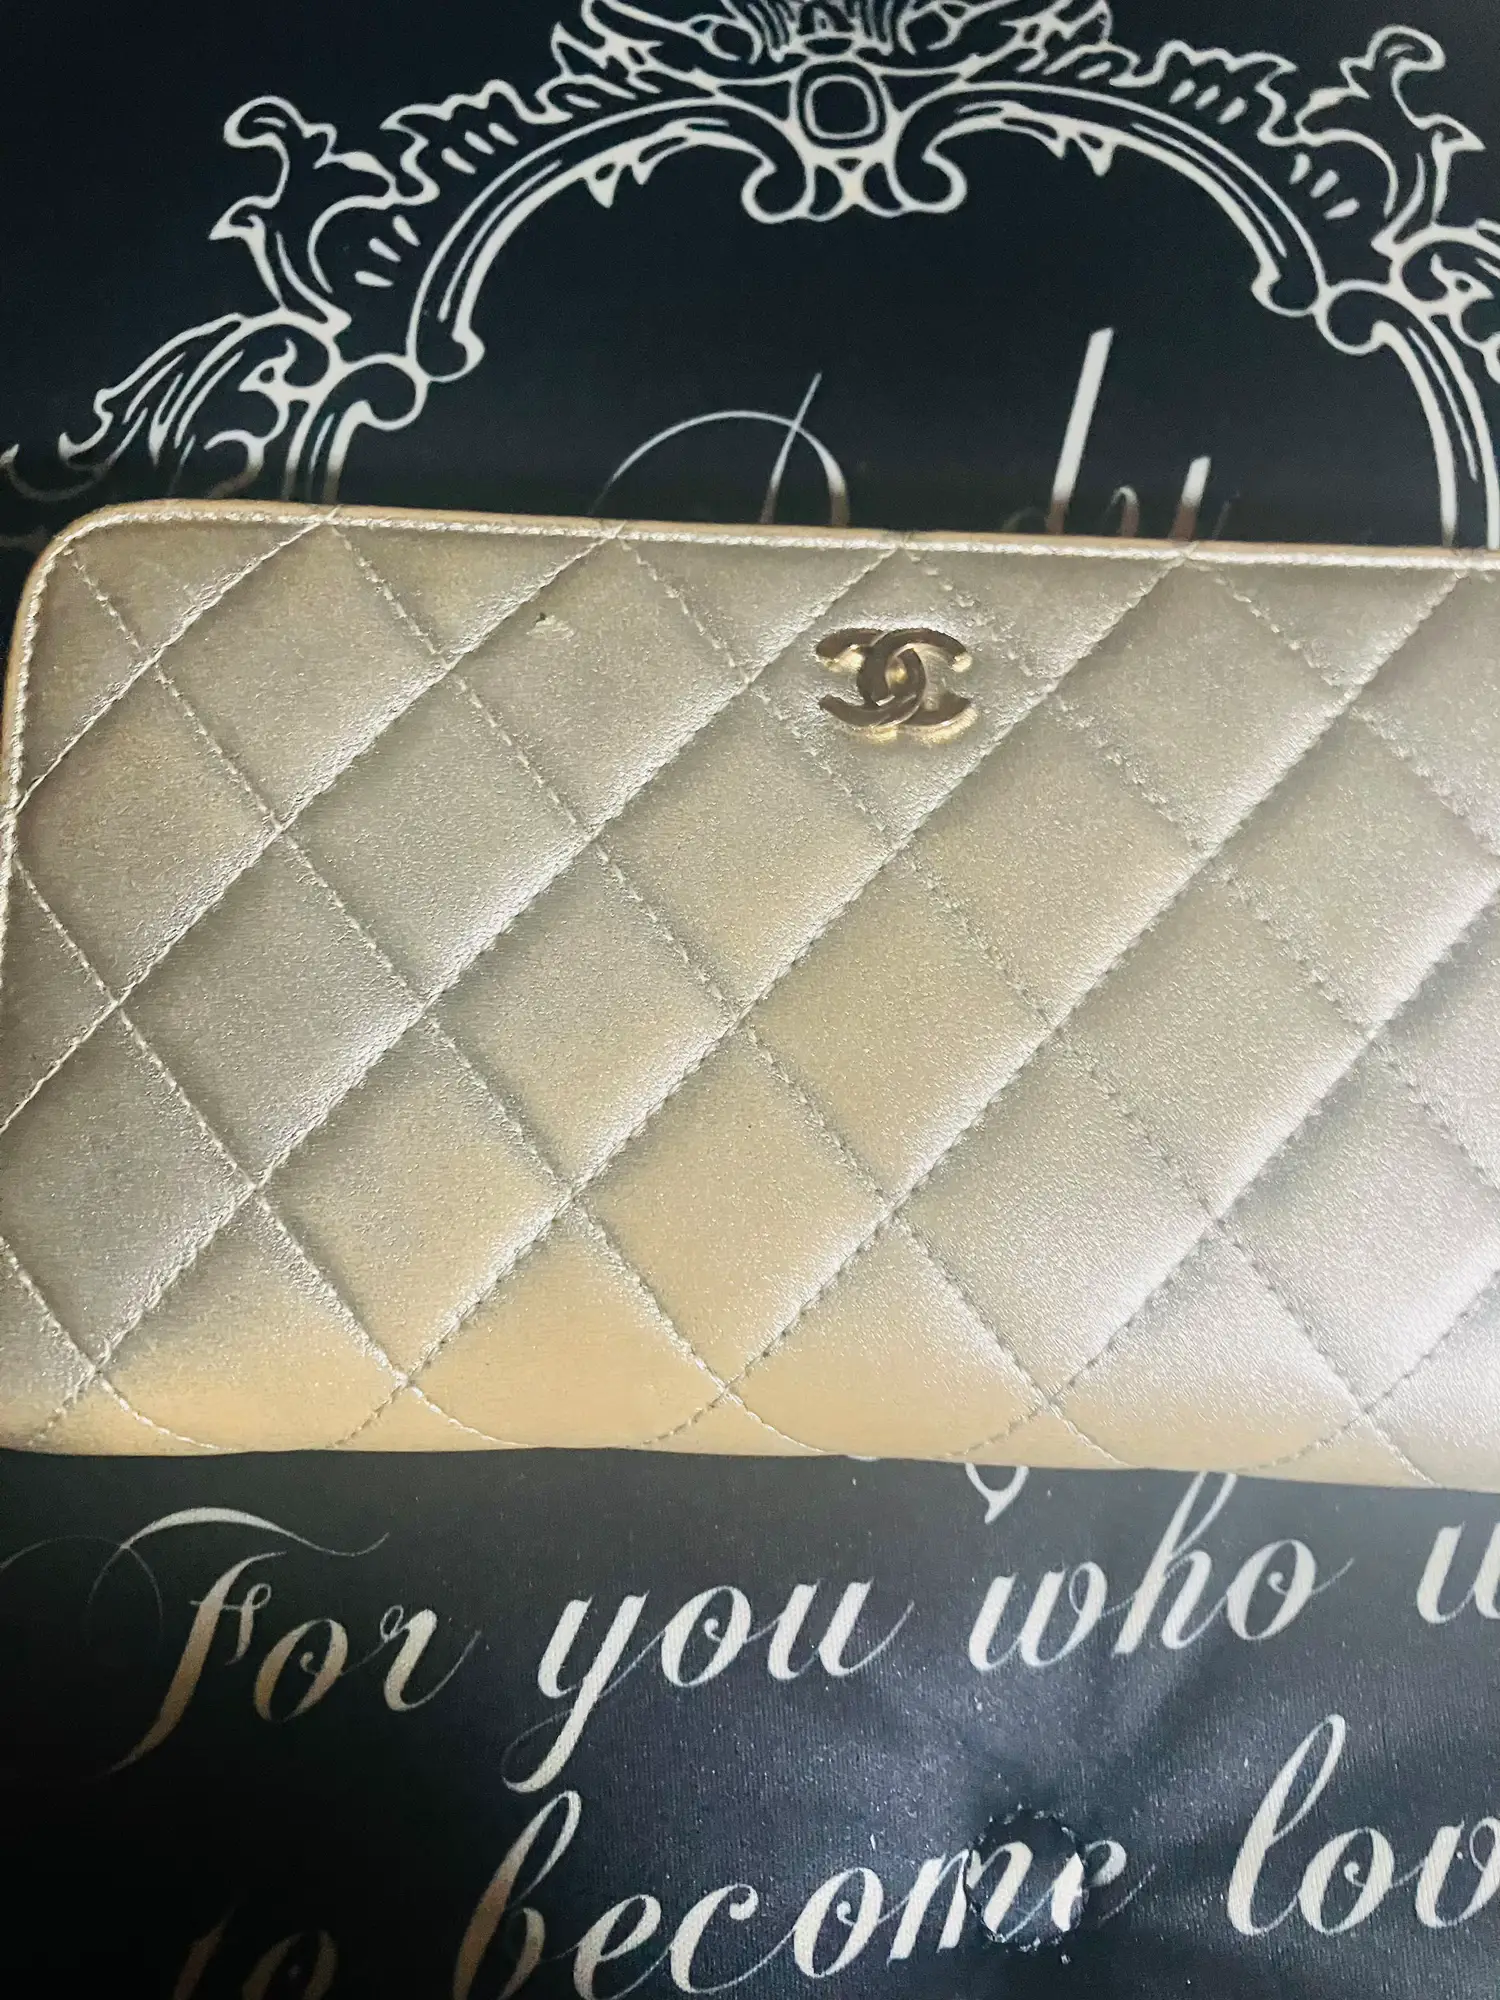 CHANEL ZIP AROUND WALLET LAMBSKIN LEATHER REVIEW #Chanel #Wallet